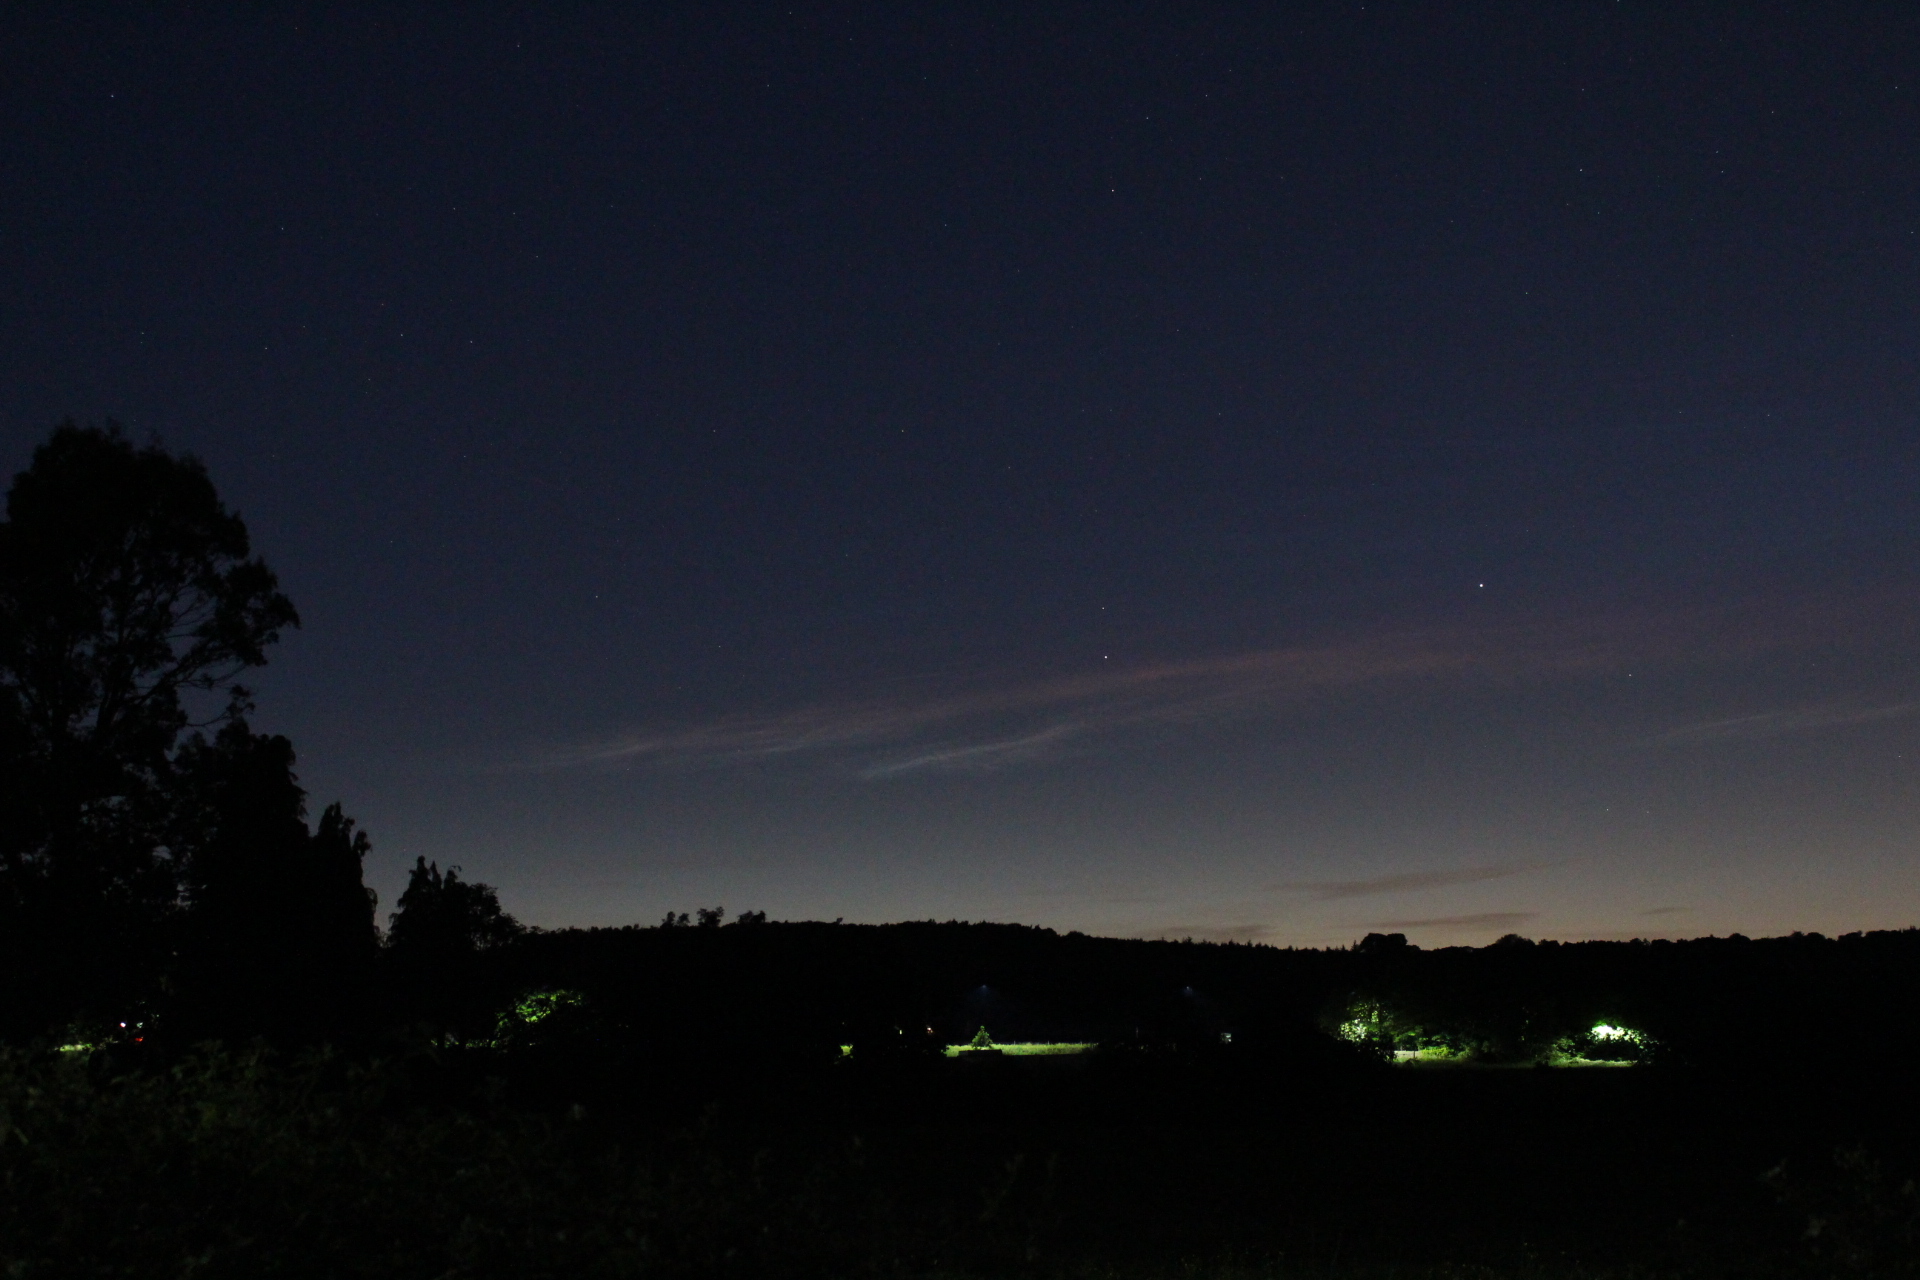 This image from Colin Steele of a fast fading NLC, thakyou Colin